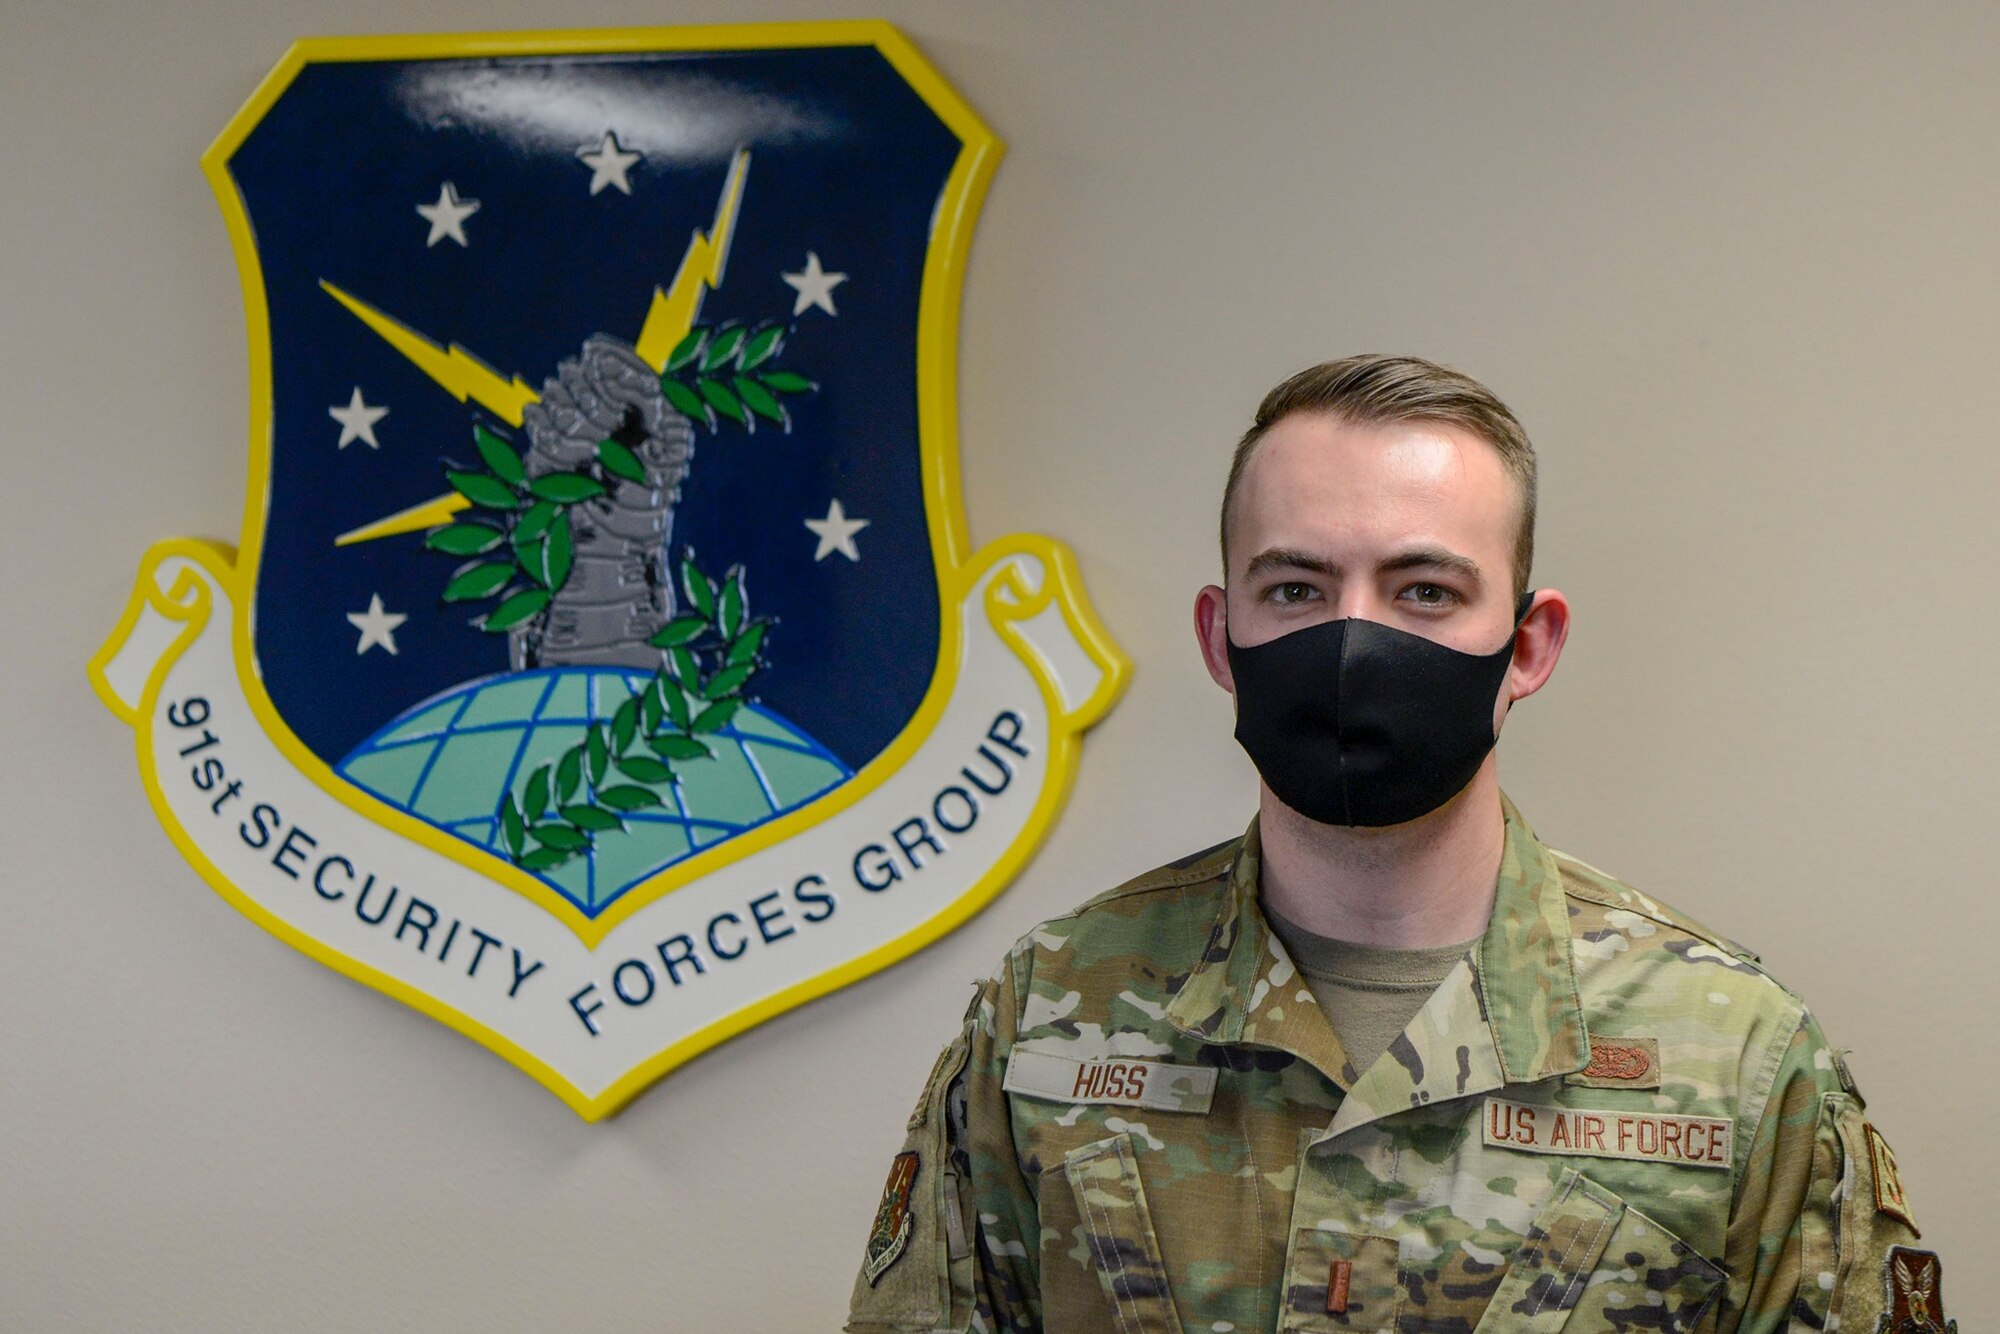 2nd Lt. Axel Huss, Executive Officer for the 91st Security Forces Group at the 91st Security Forces building in Minot Air Force Base, North Dakota Feb. 24, 2021.